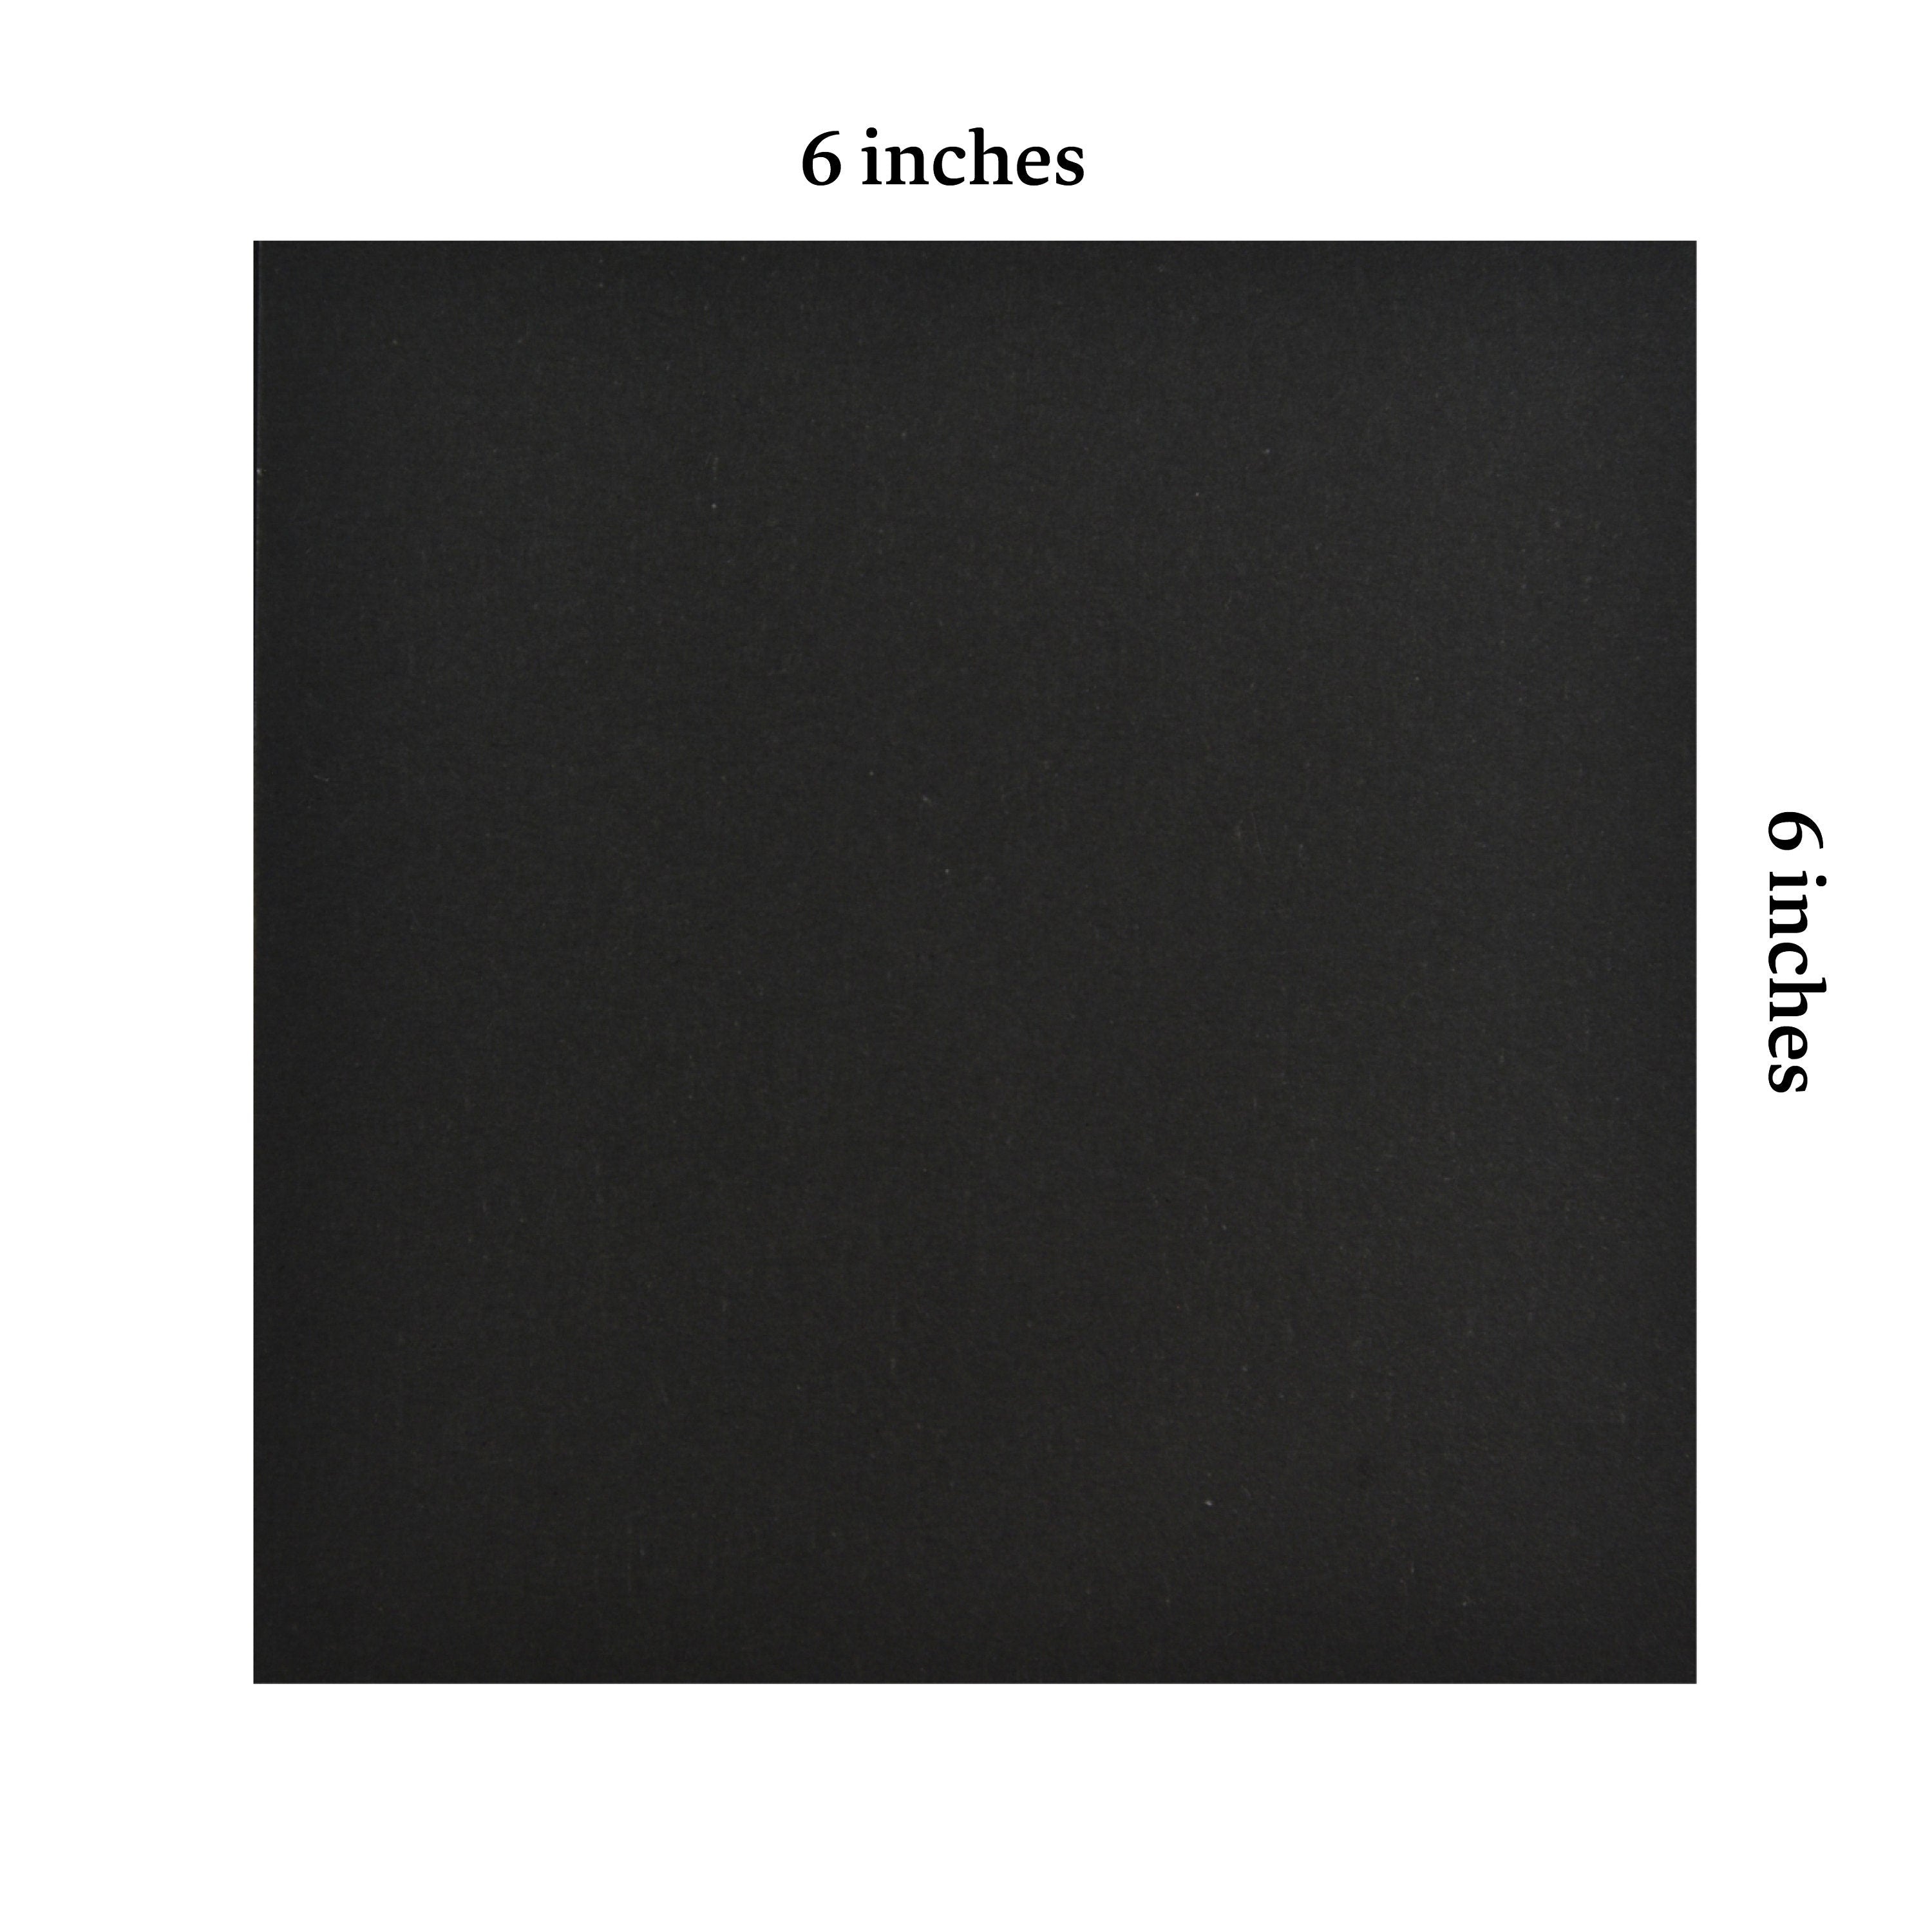 100 Black Origami Paper Sheets 6x6 inches Square Paper Pack for Folding, Origami Cranes, and Decoration - S11